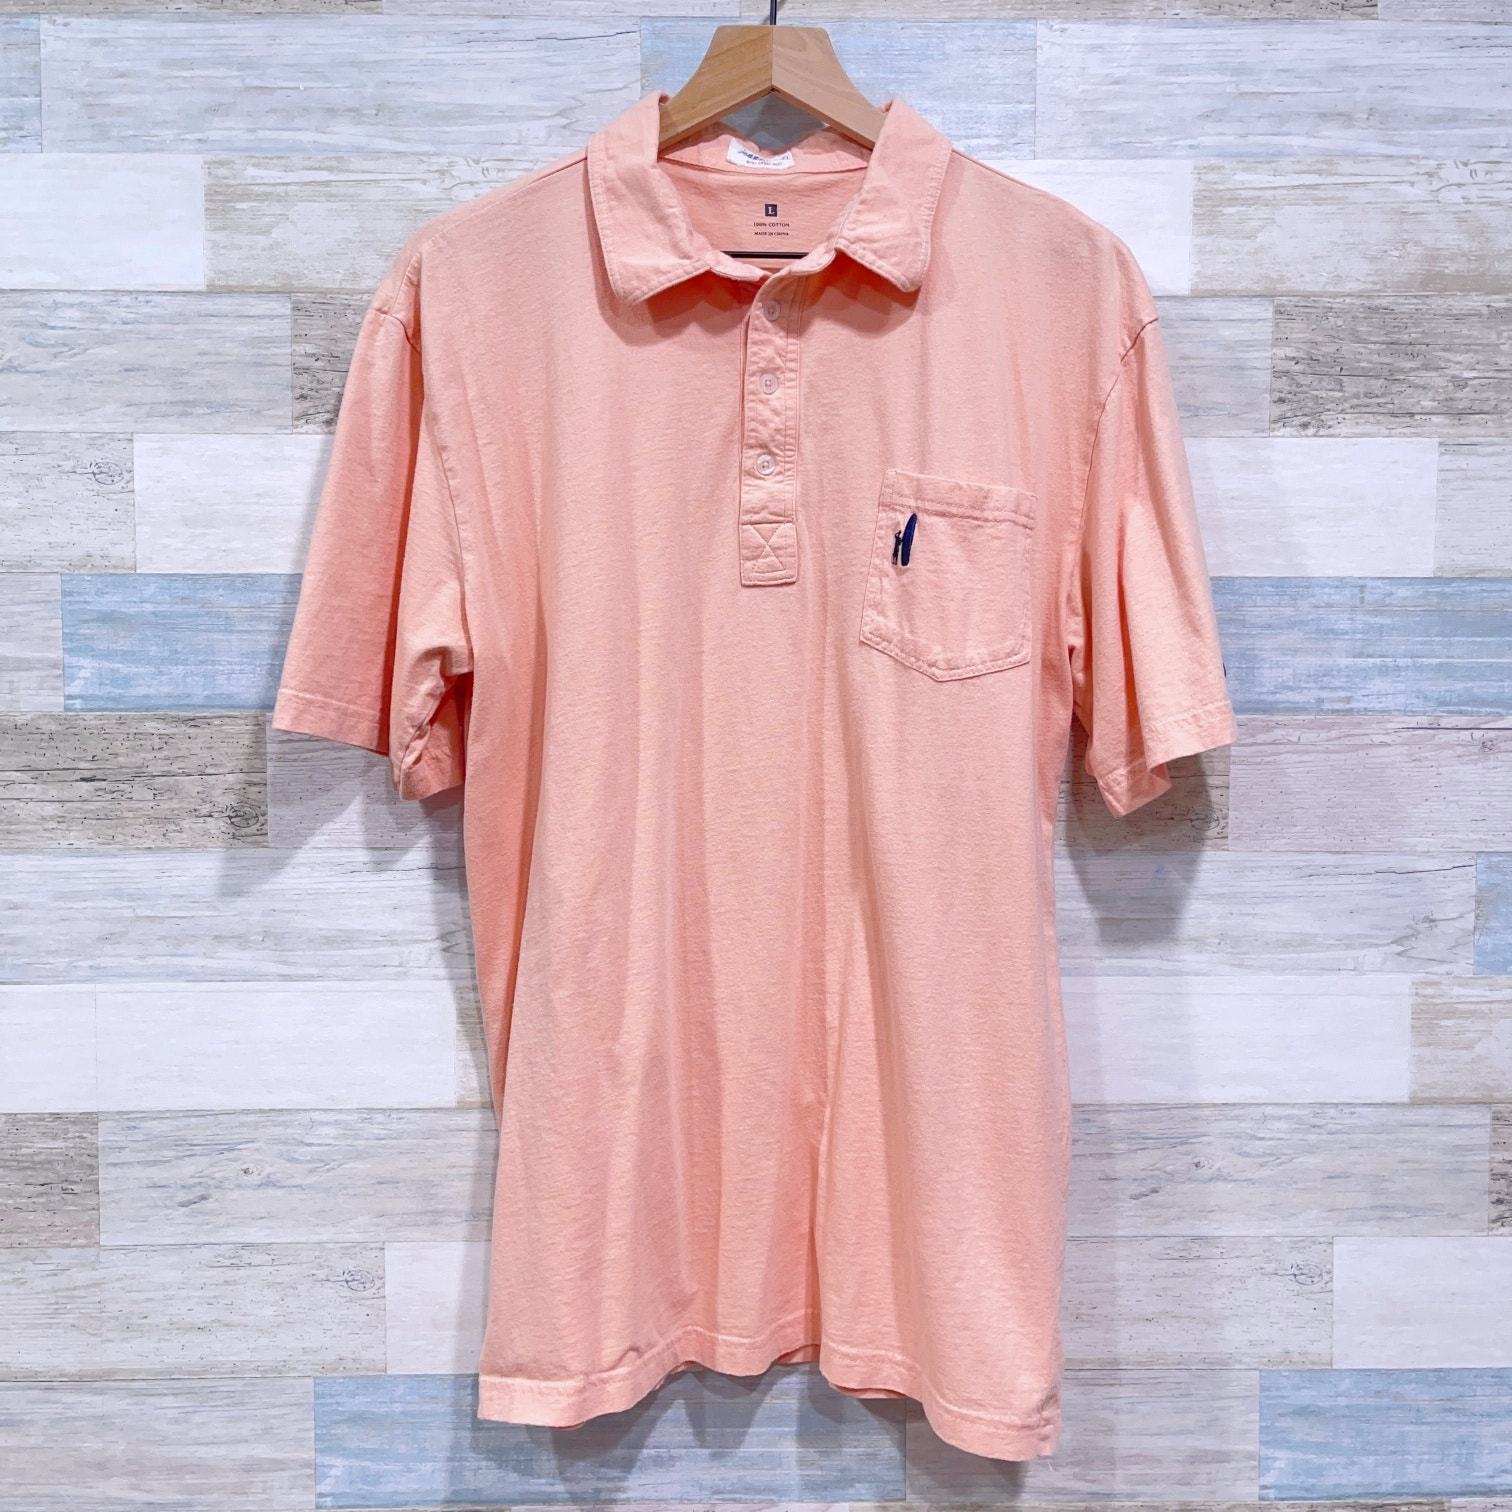 Primary image for Johnnie O The Original Polo Shirt Light Coral Cotton Golf Casual Mens Large